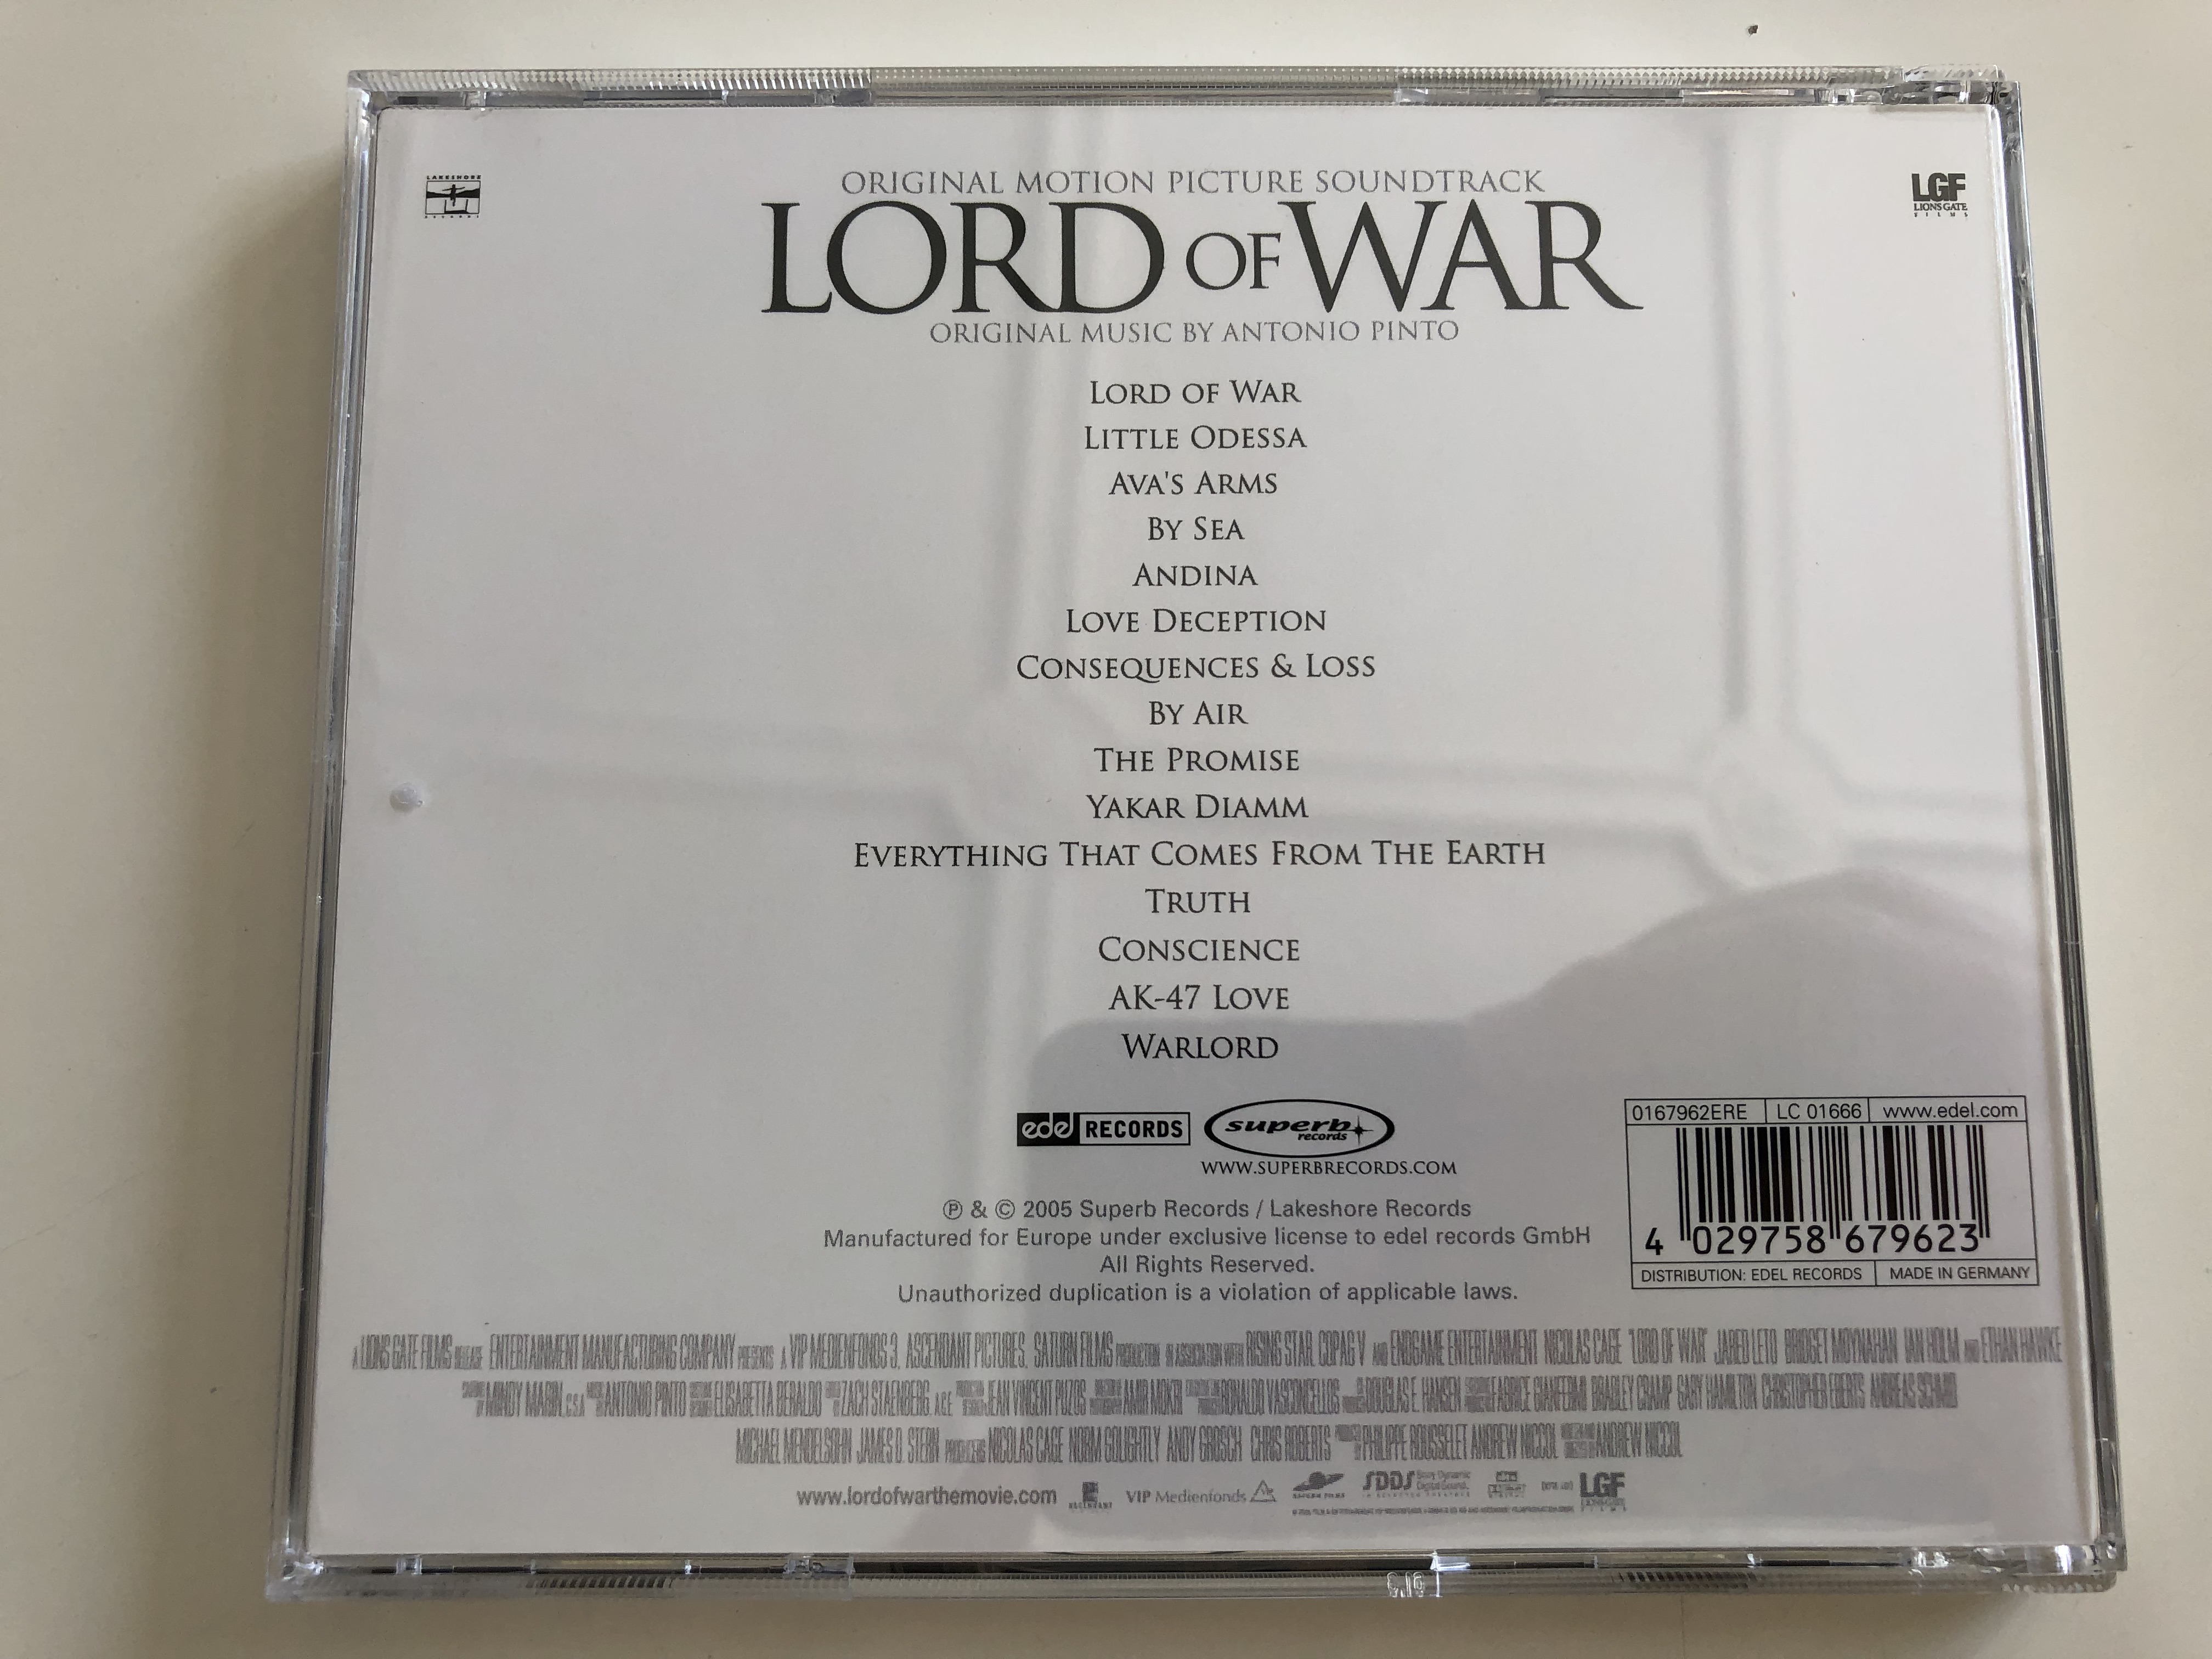 lord-of-war-original-motion-picture-soundtrack-original-music-by-antonio-pinto-audio-cd-2005-0167962ere-5-.jpg